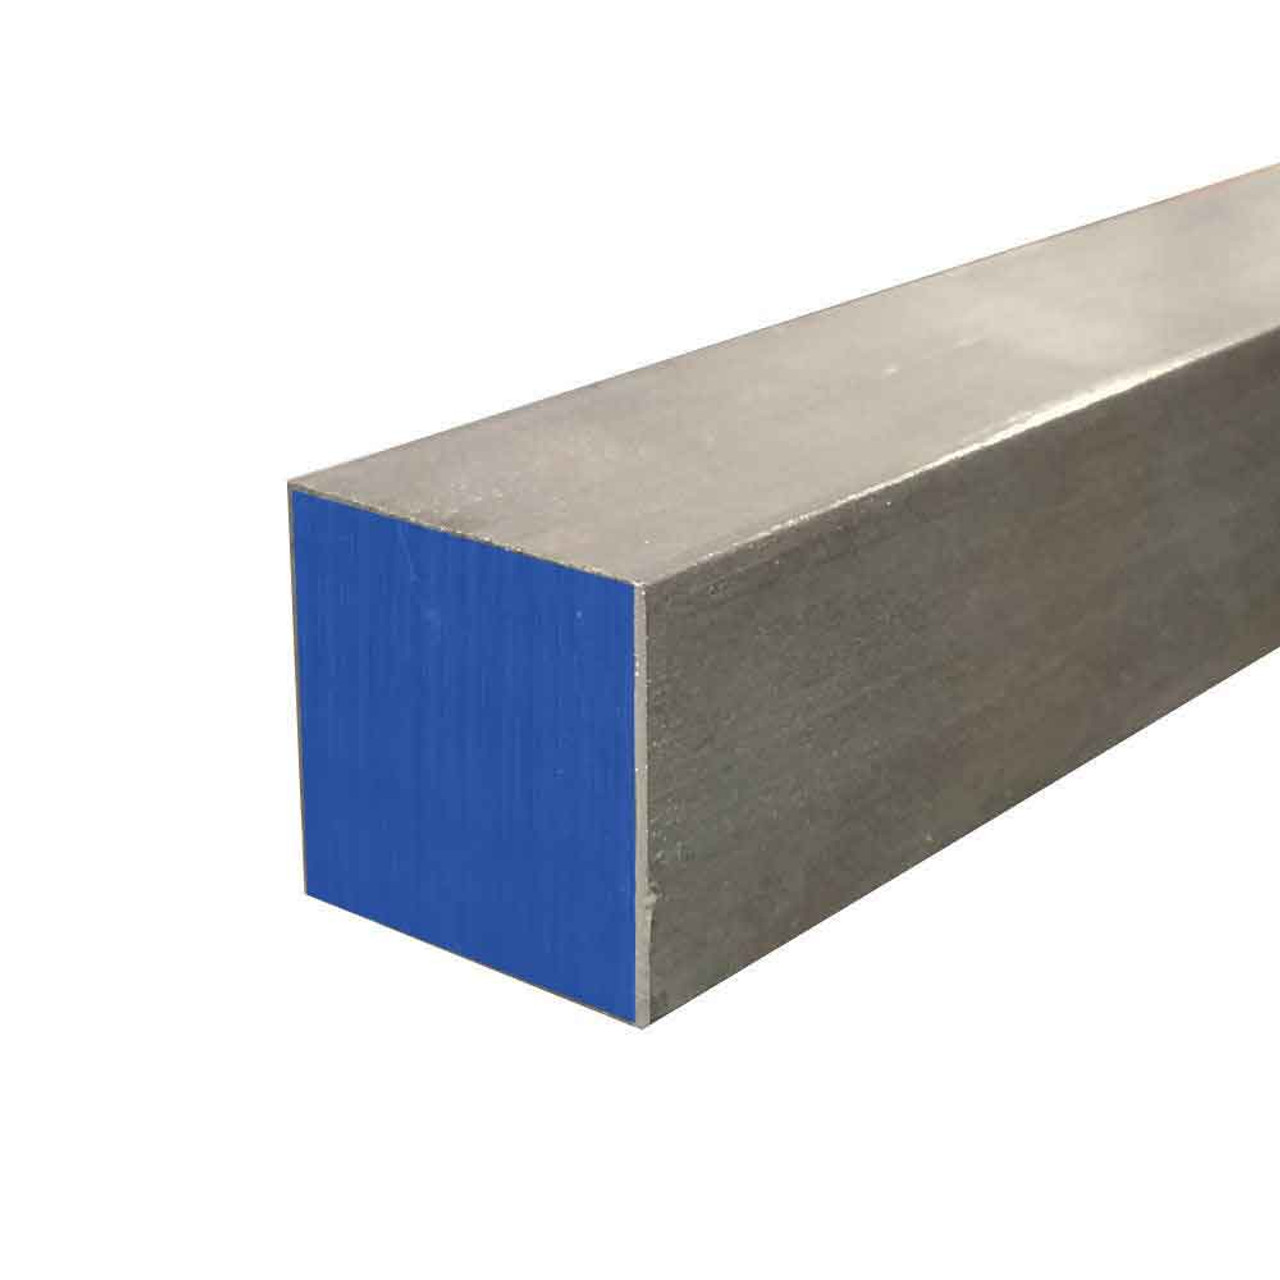 0.188" x 0.188" x 12", 304 Stainless Steel Square Bar, Cold Finished